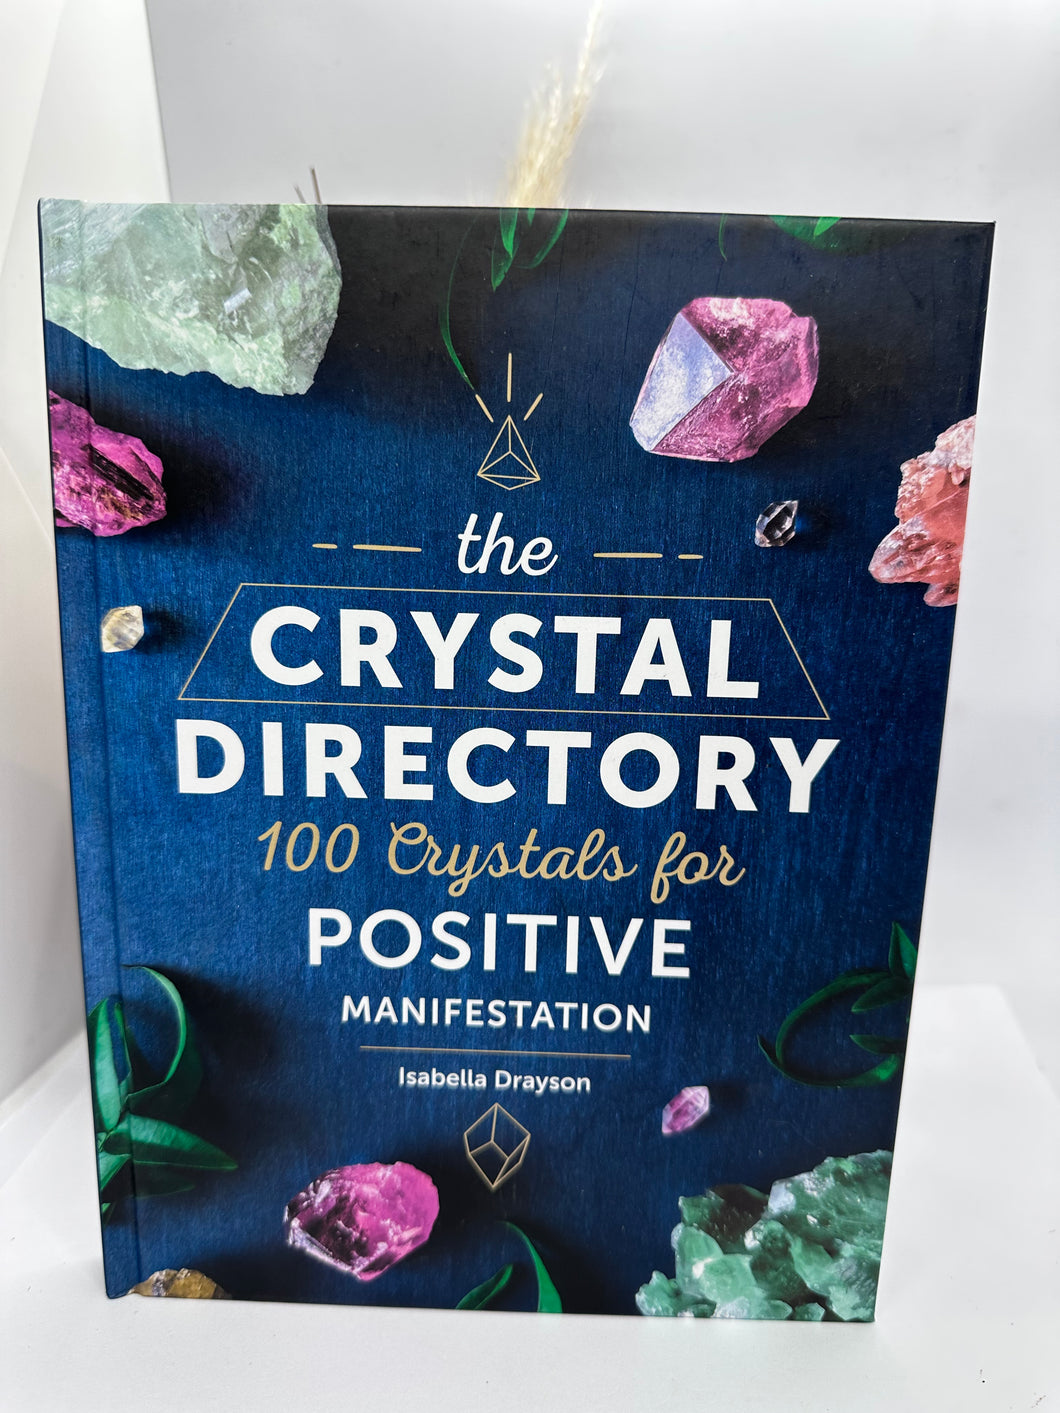 The Crystal Dictionary